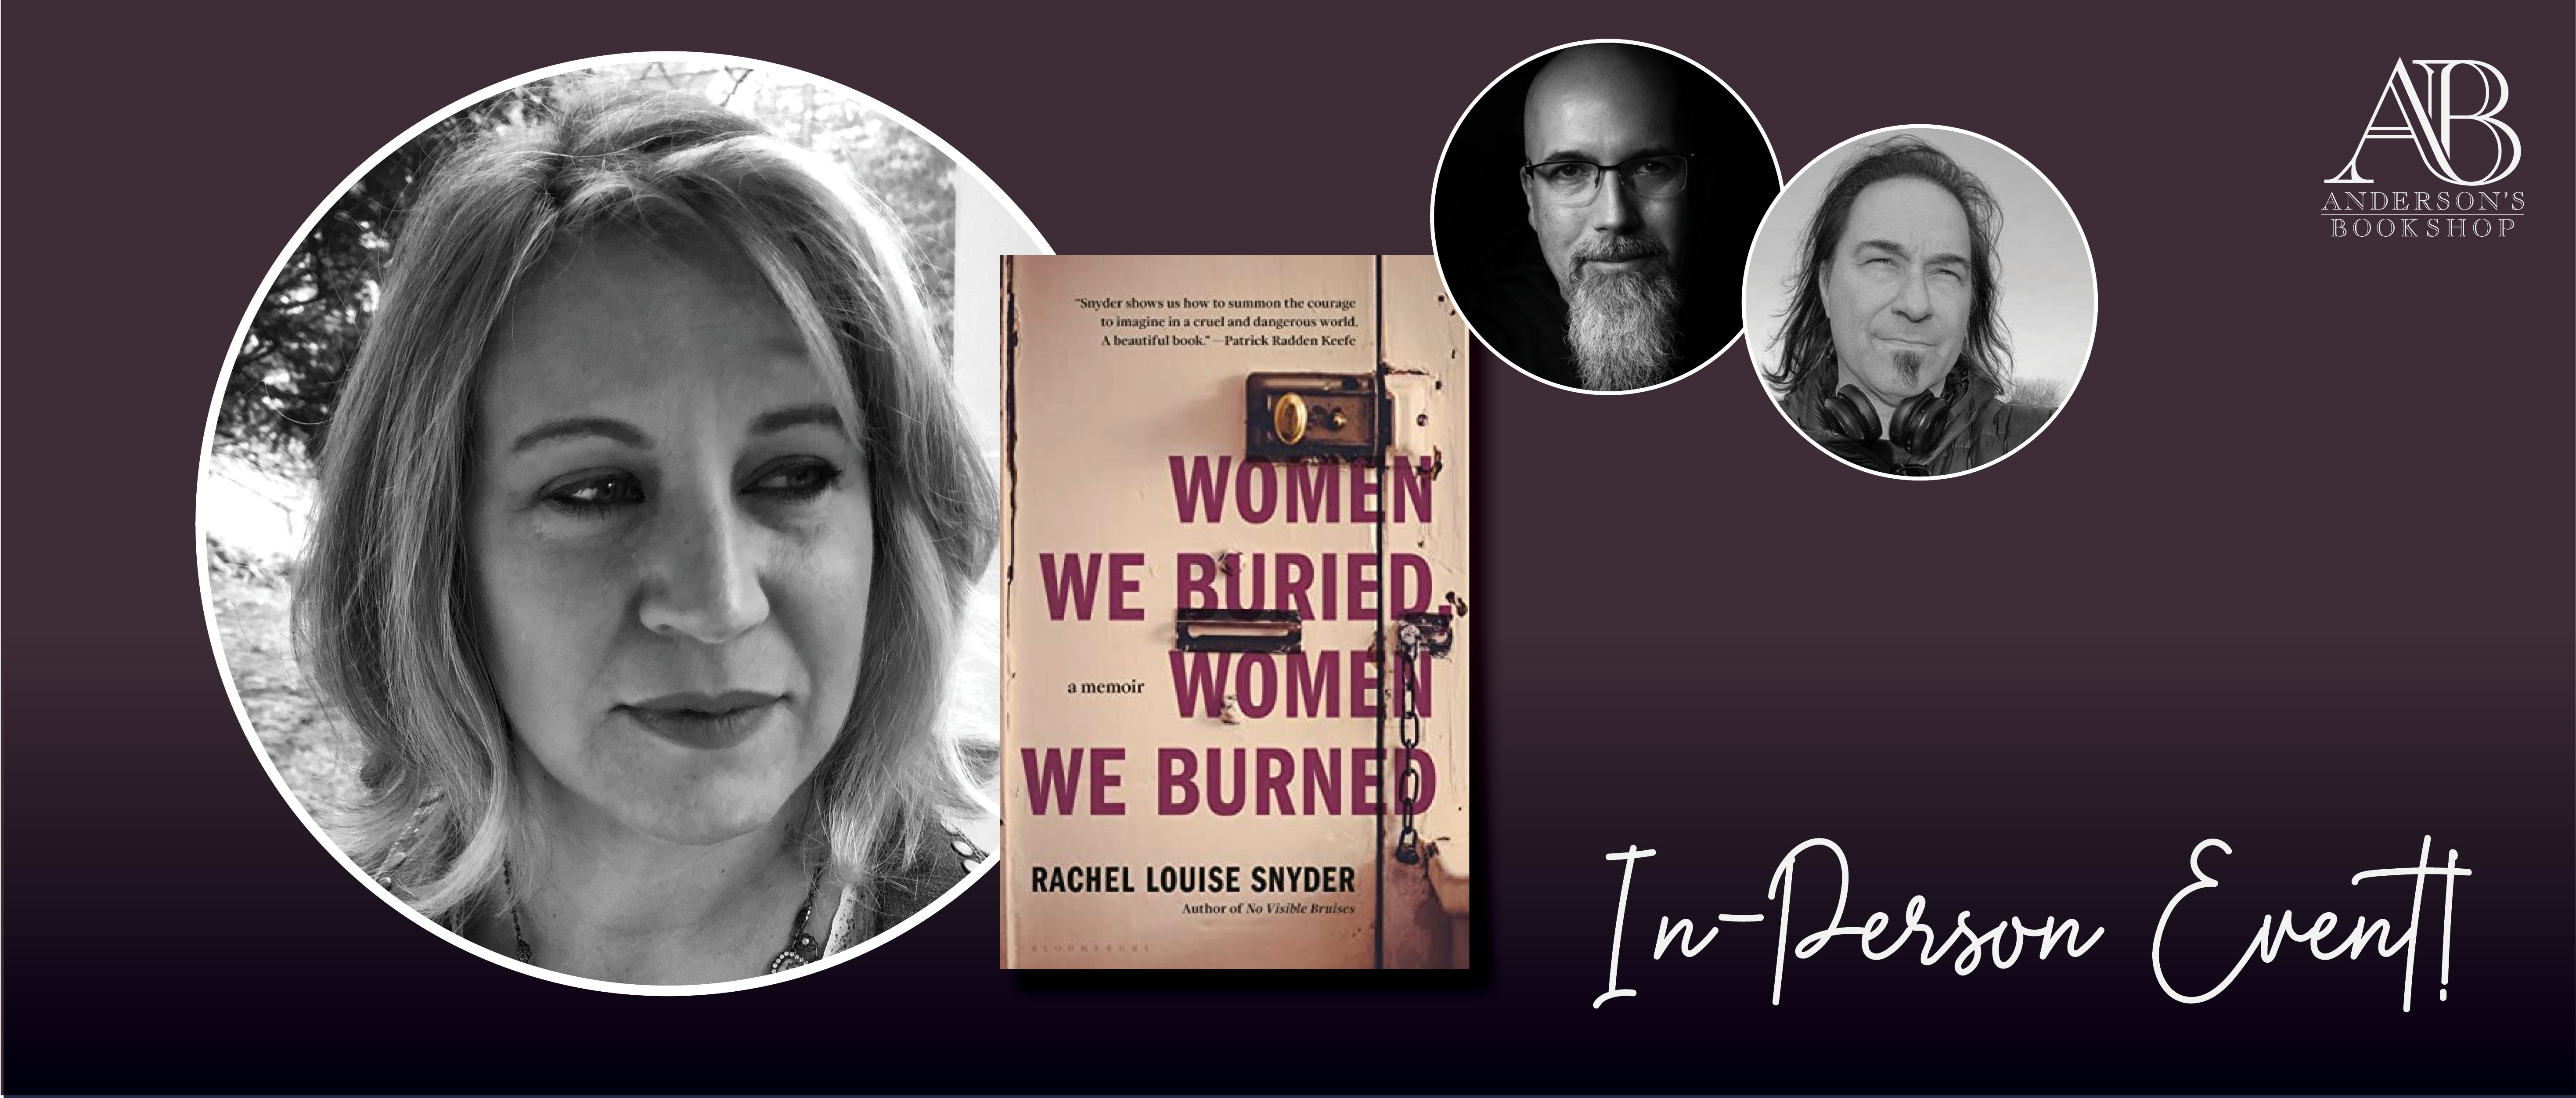 Author Event with Rachel Louise Snyder/Women We Buried, Women We Burned